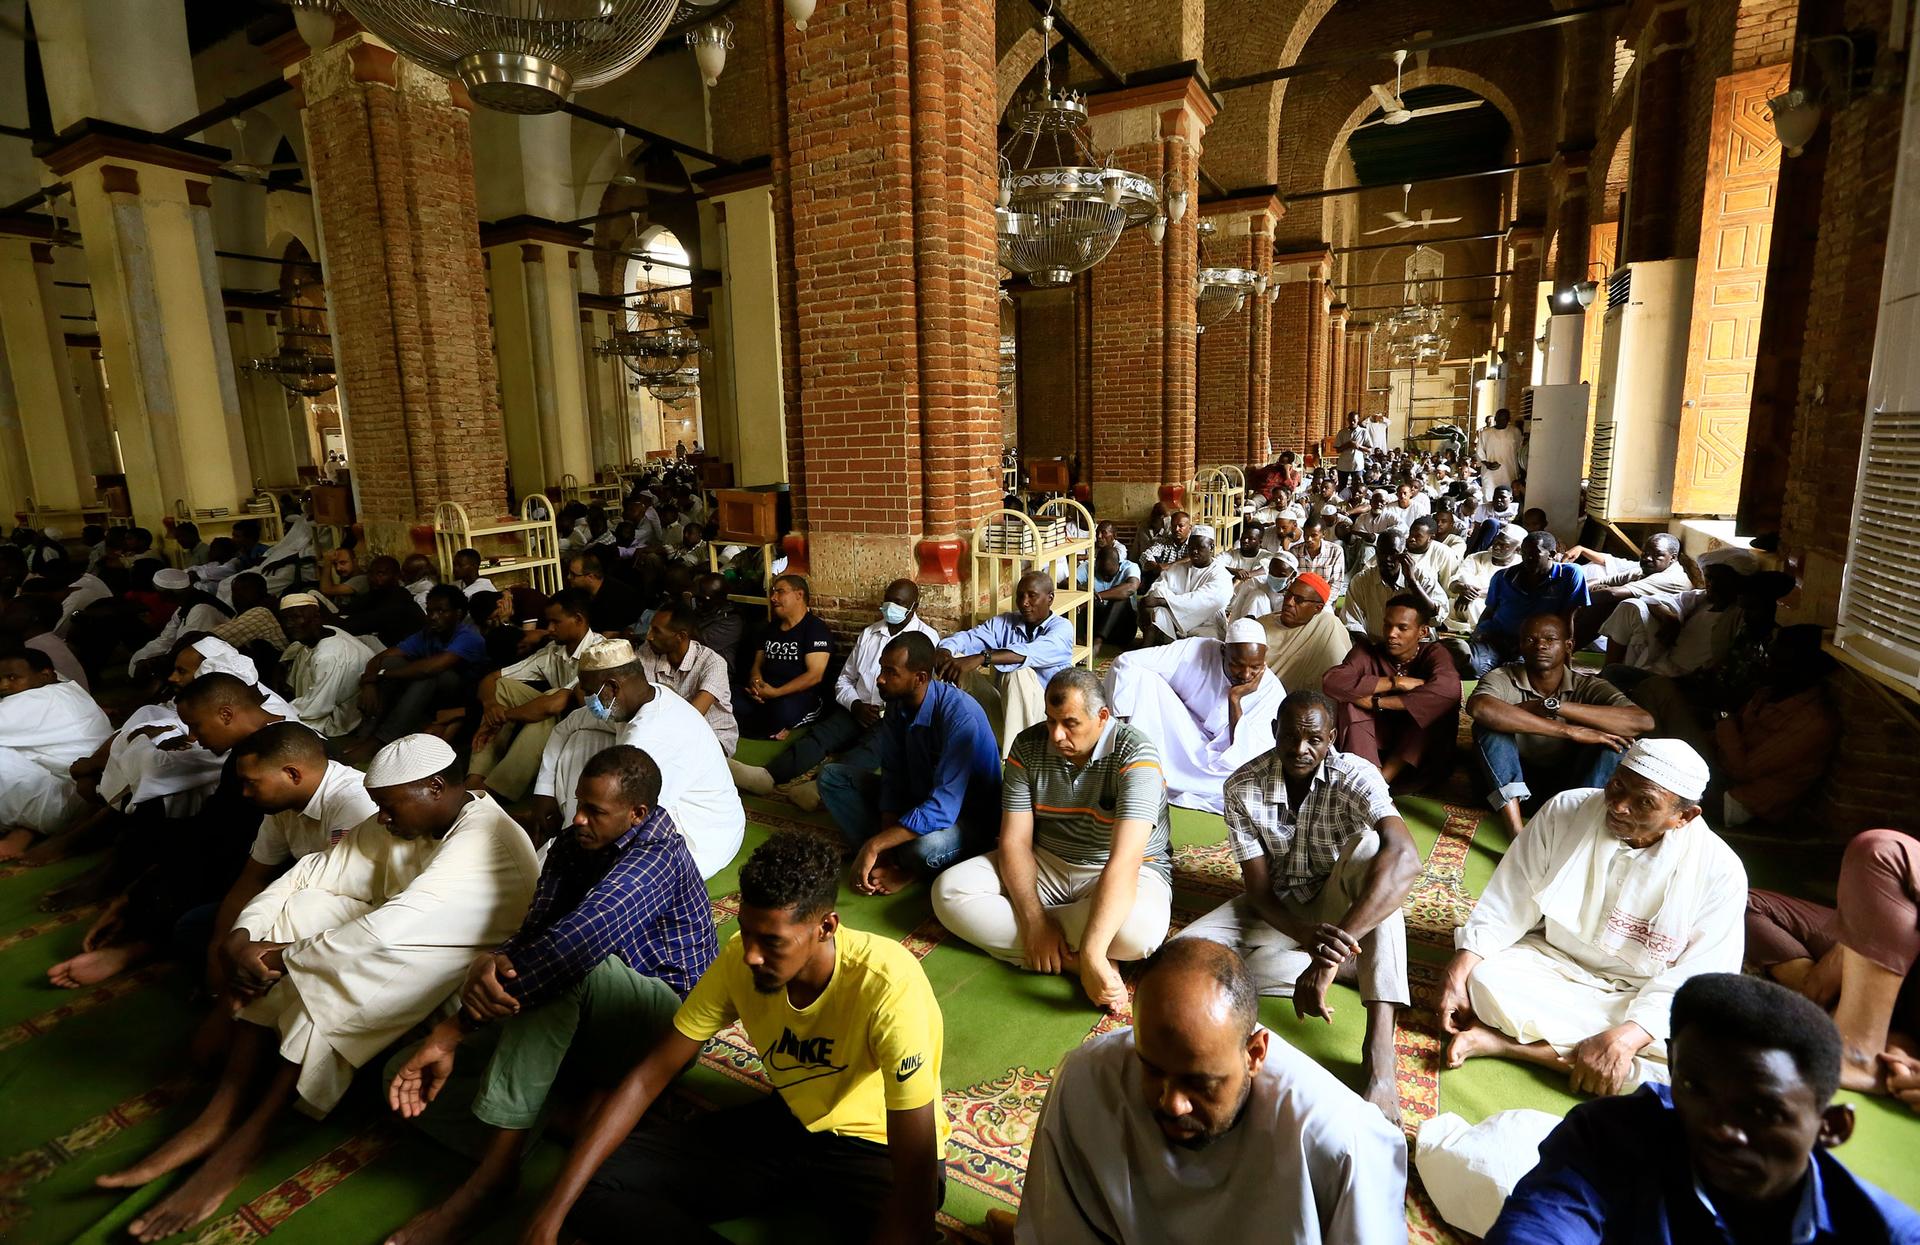 A large group of people are show sitting on the floor of the Grand Mosque with large brick columns down the middle.